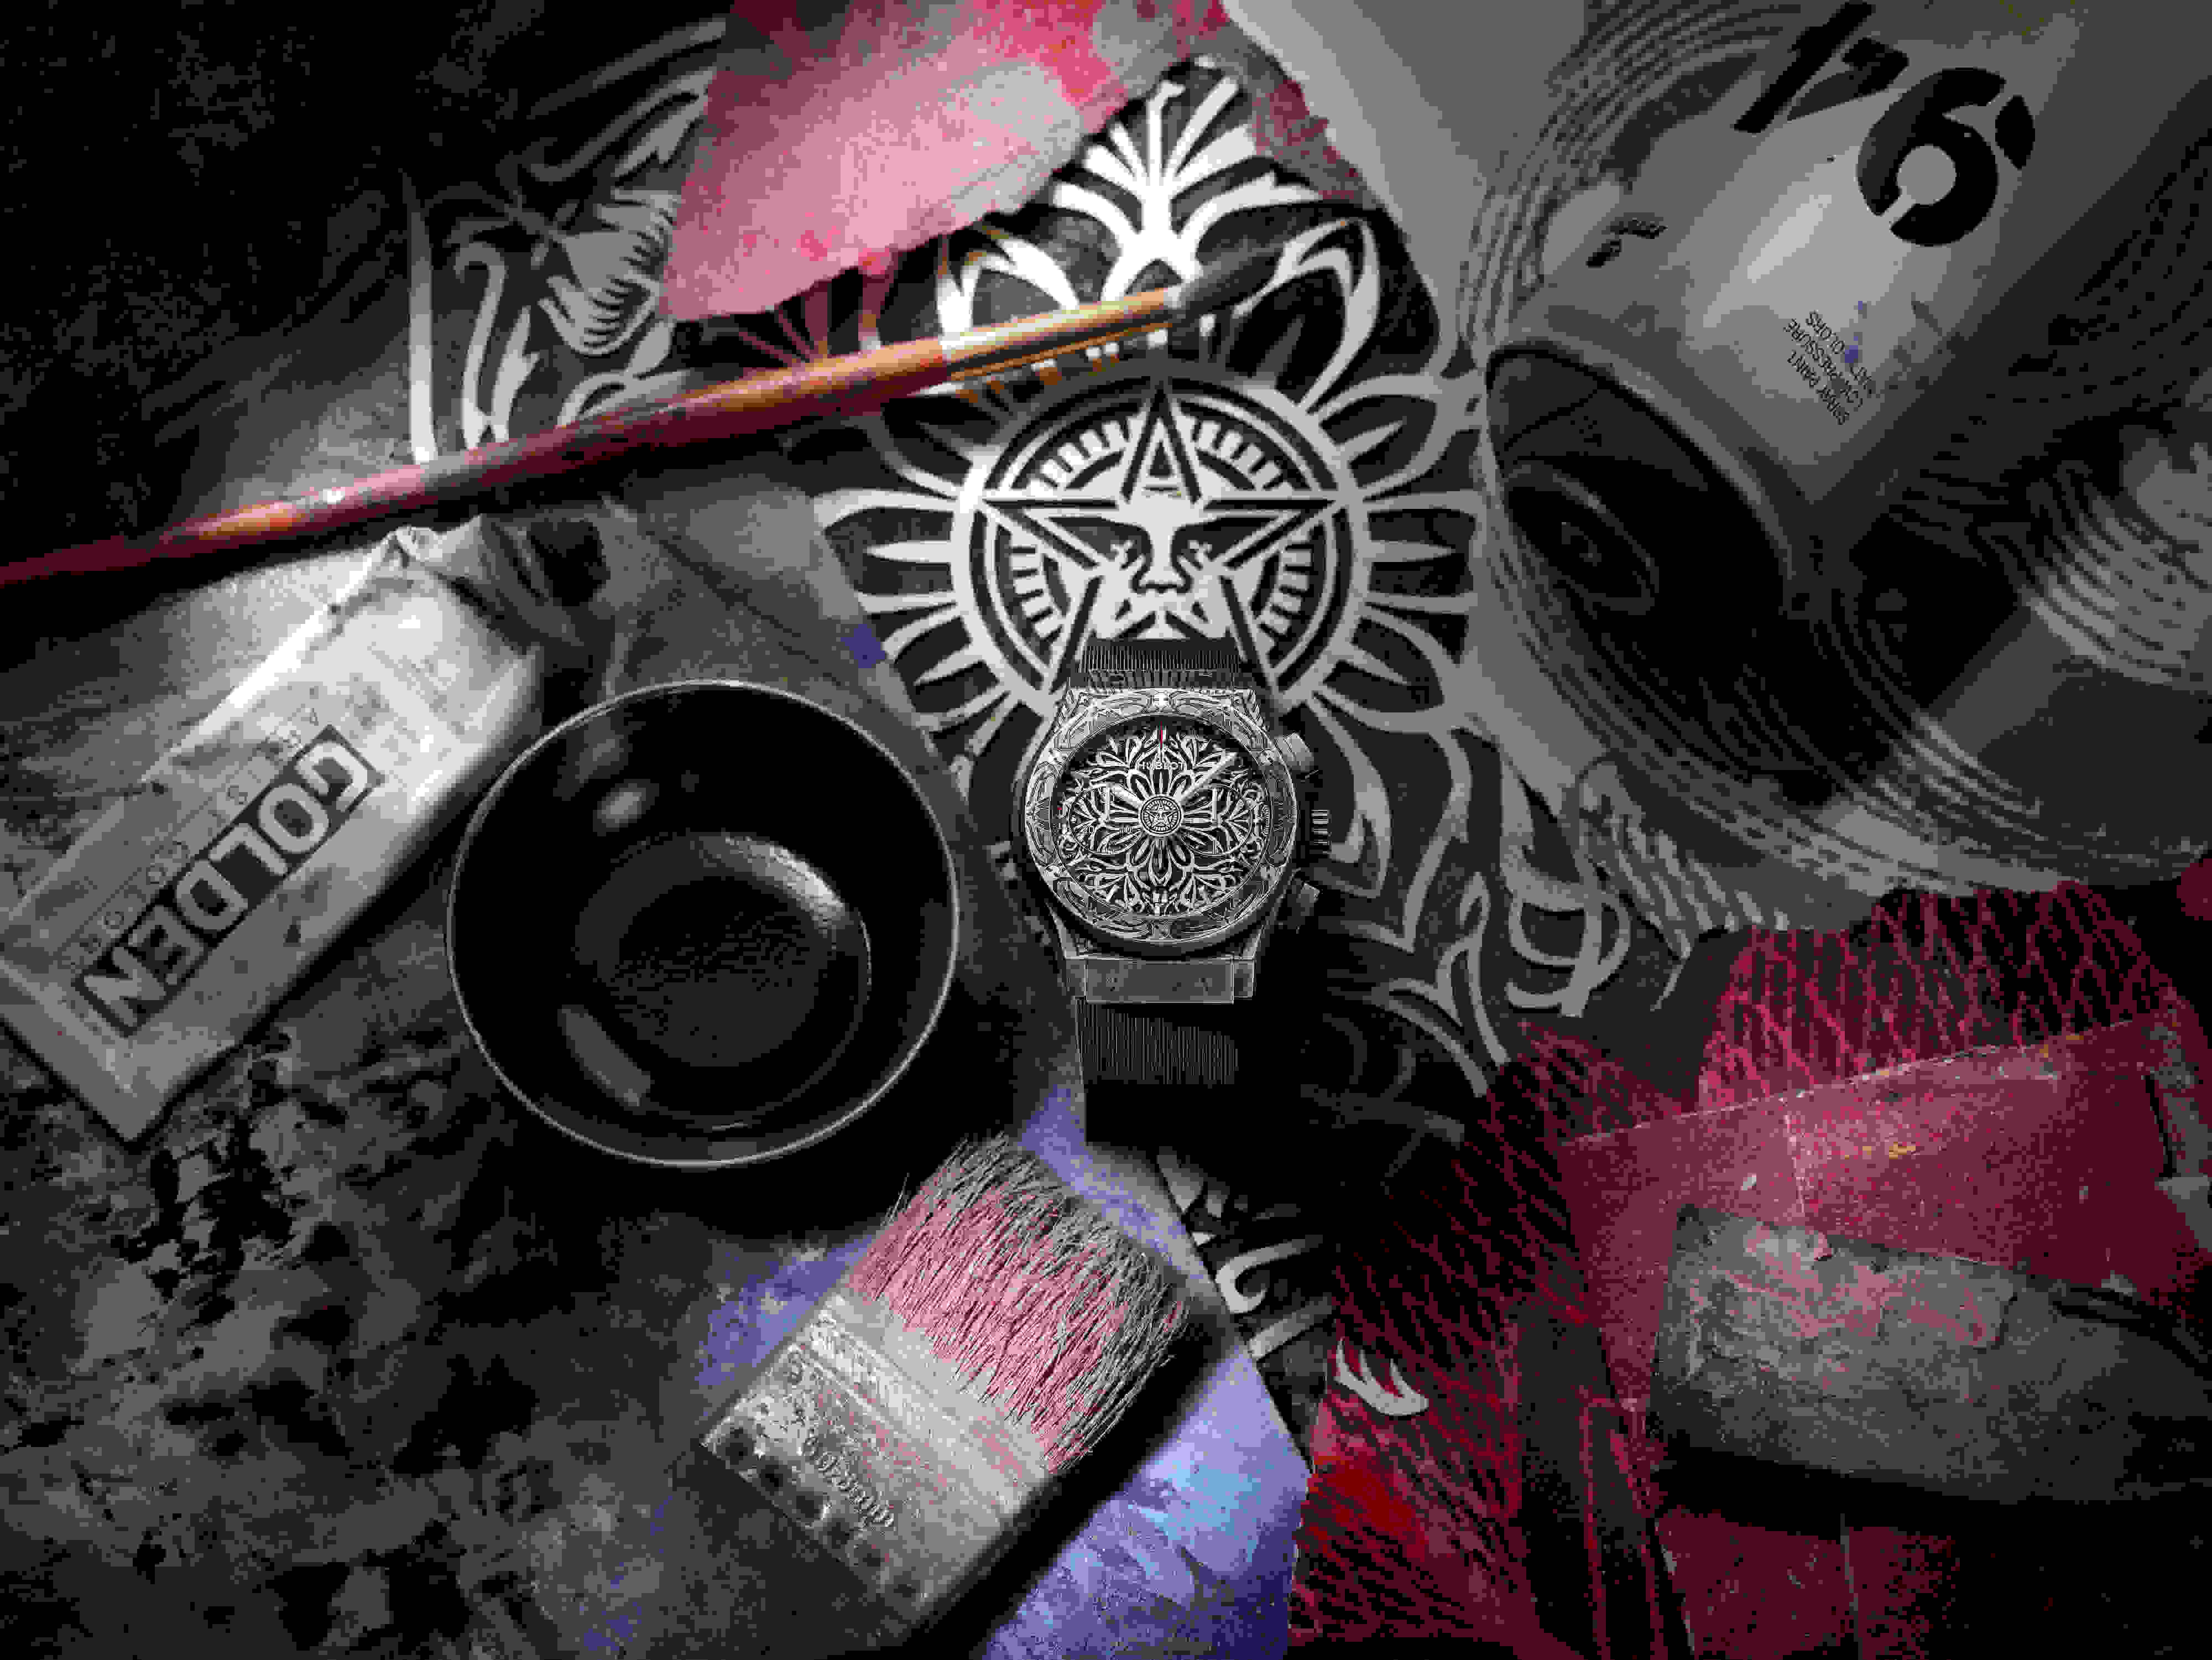 Hublot Partners With Shepard Fairey For Newest Timepiece